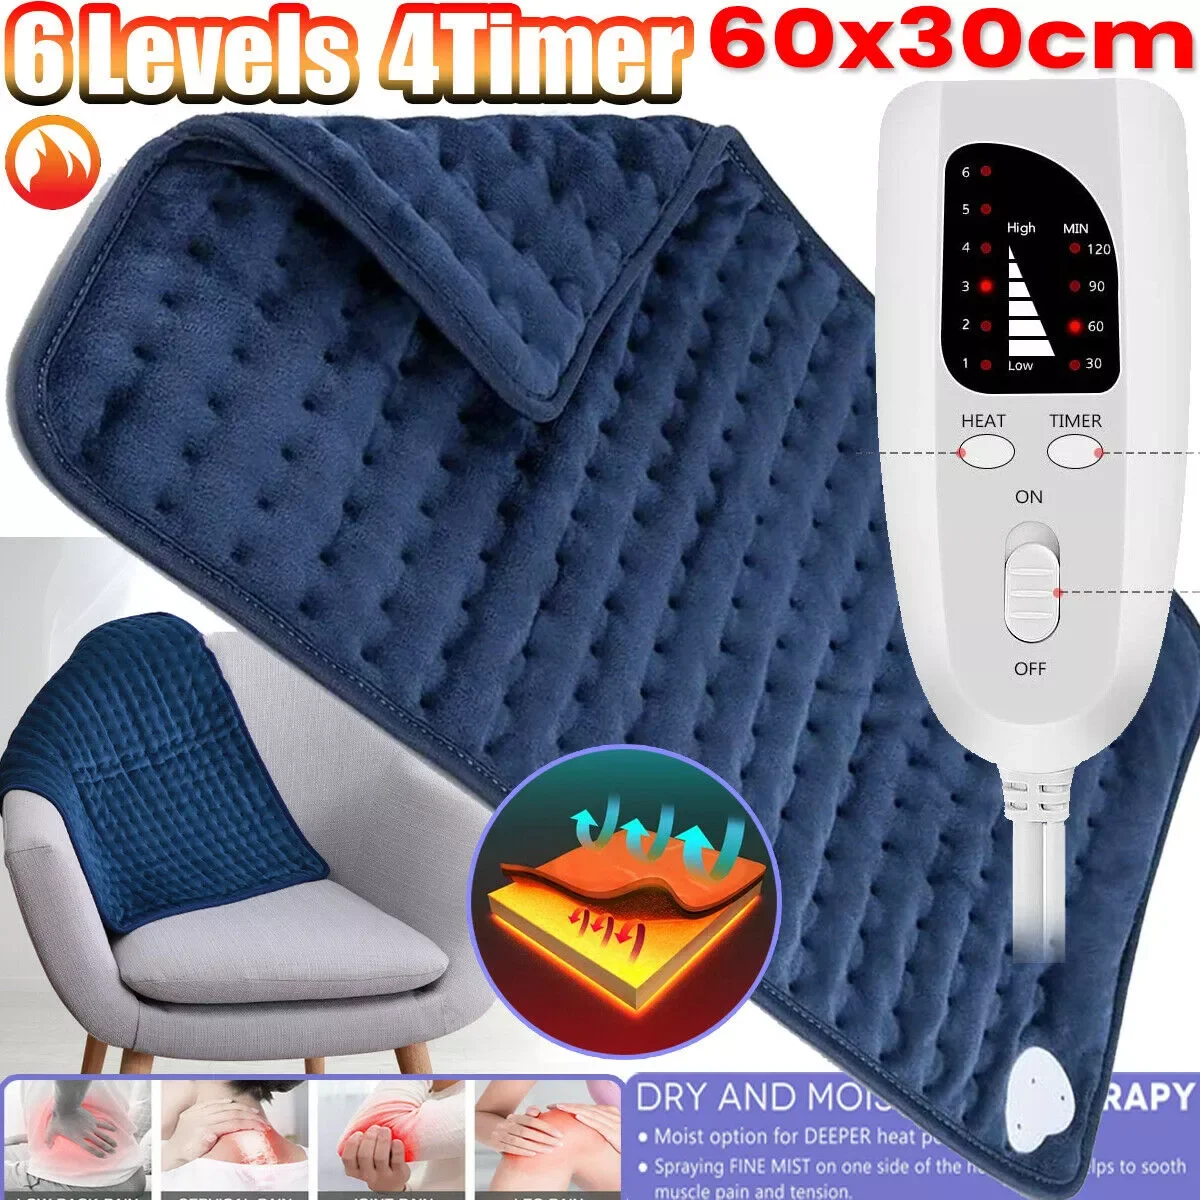 Electric Blankets Heating Pad Abdomen Waist Back Pain Relief Winter Warmer Heat Controller for Shoulder Neck Spine